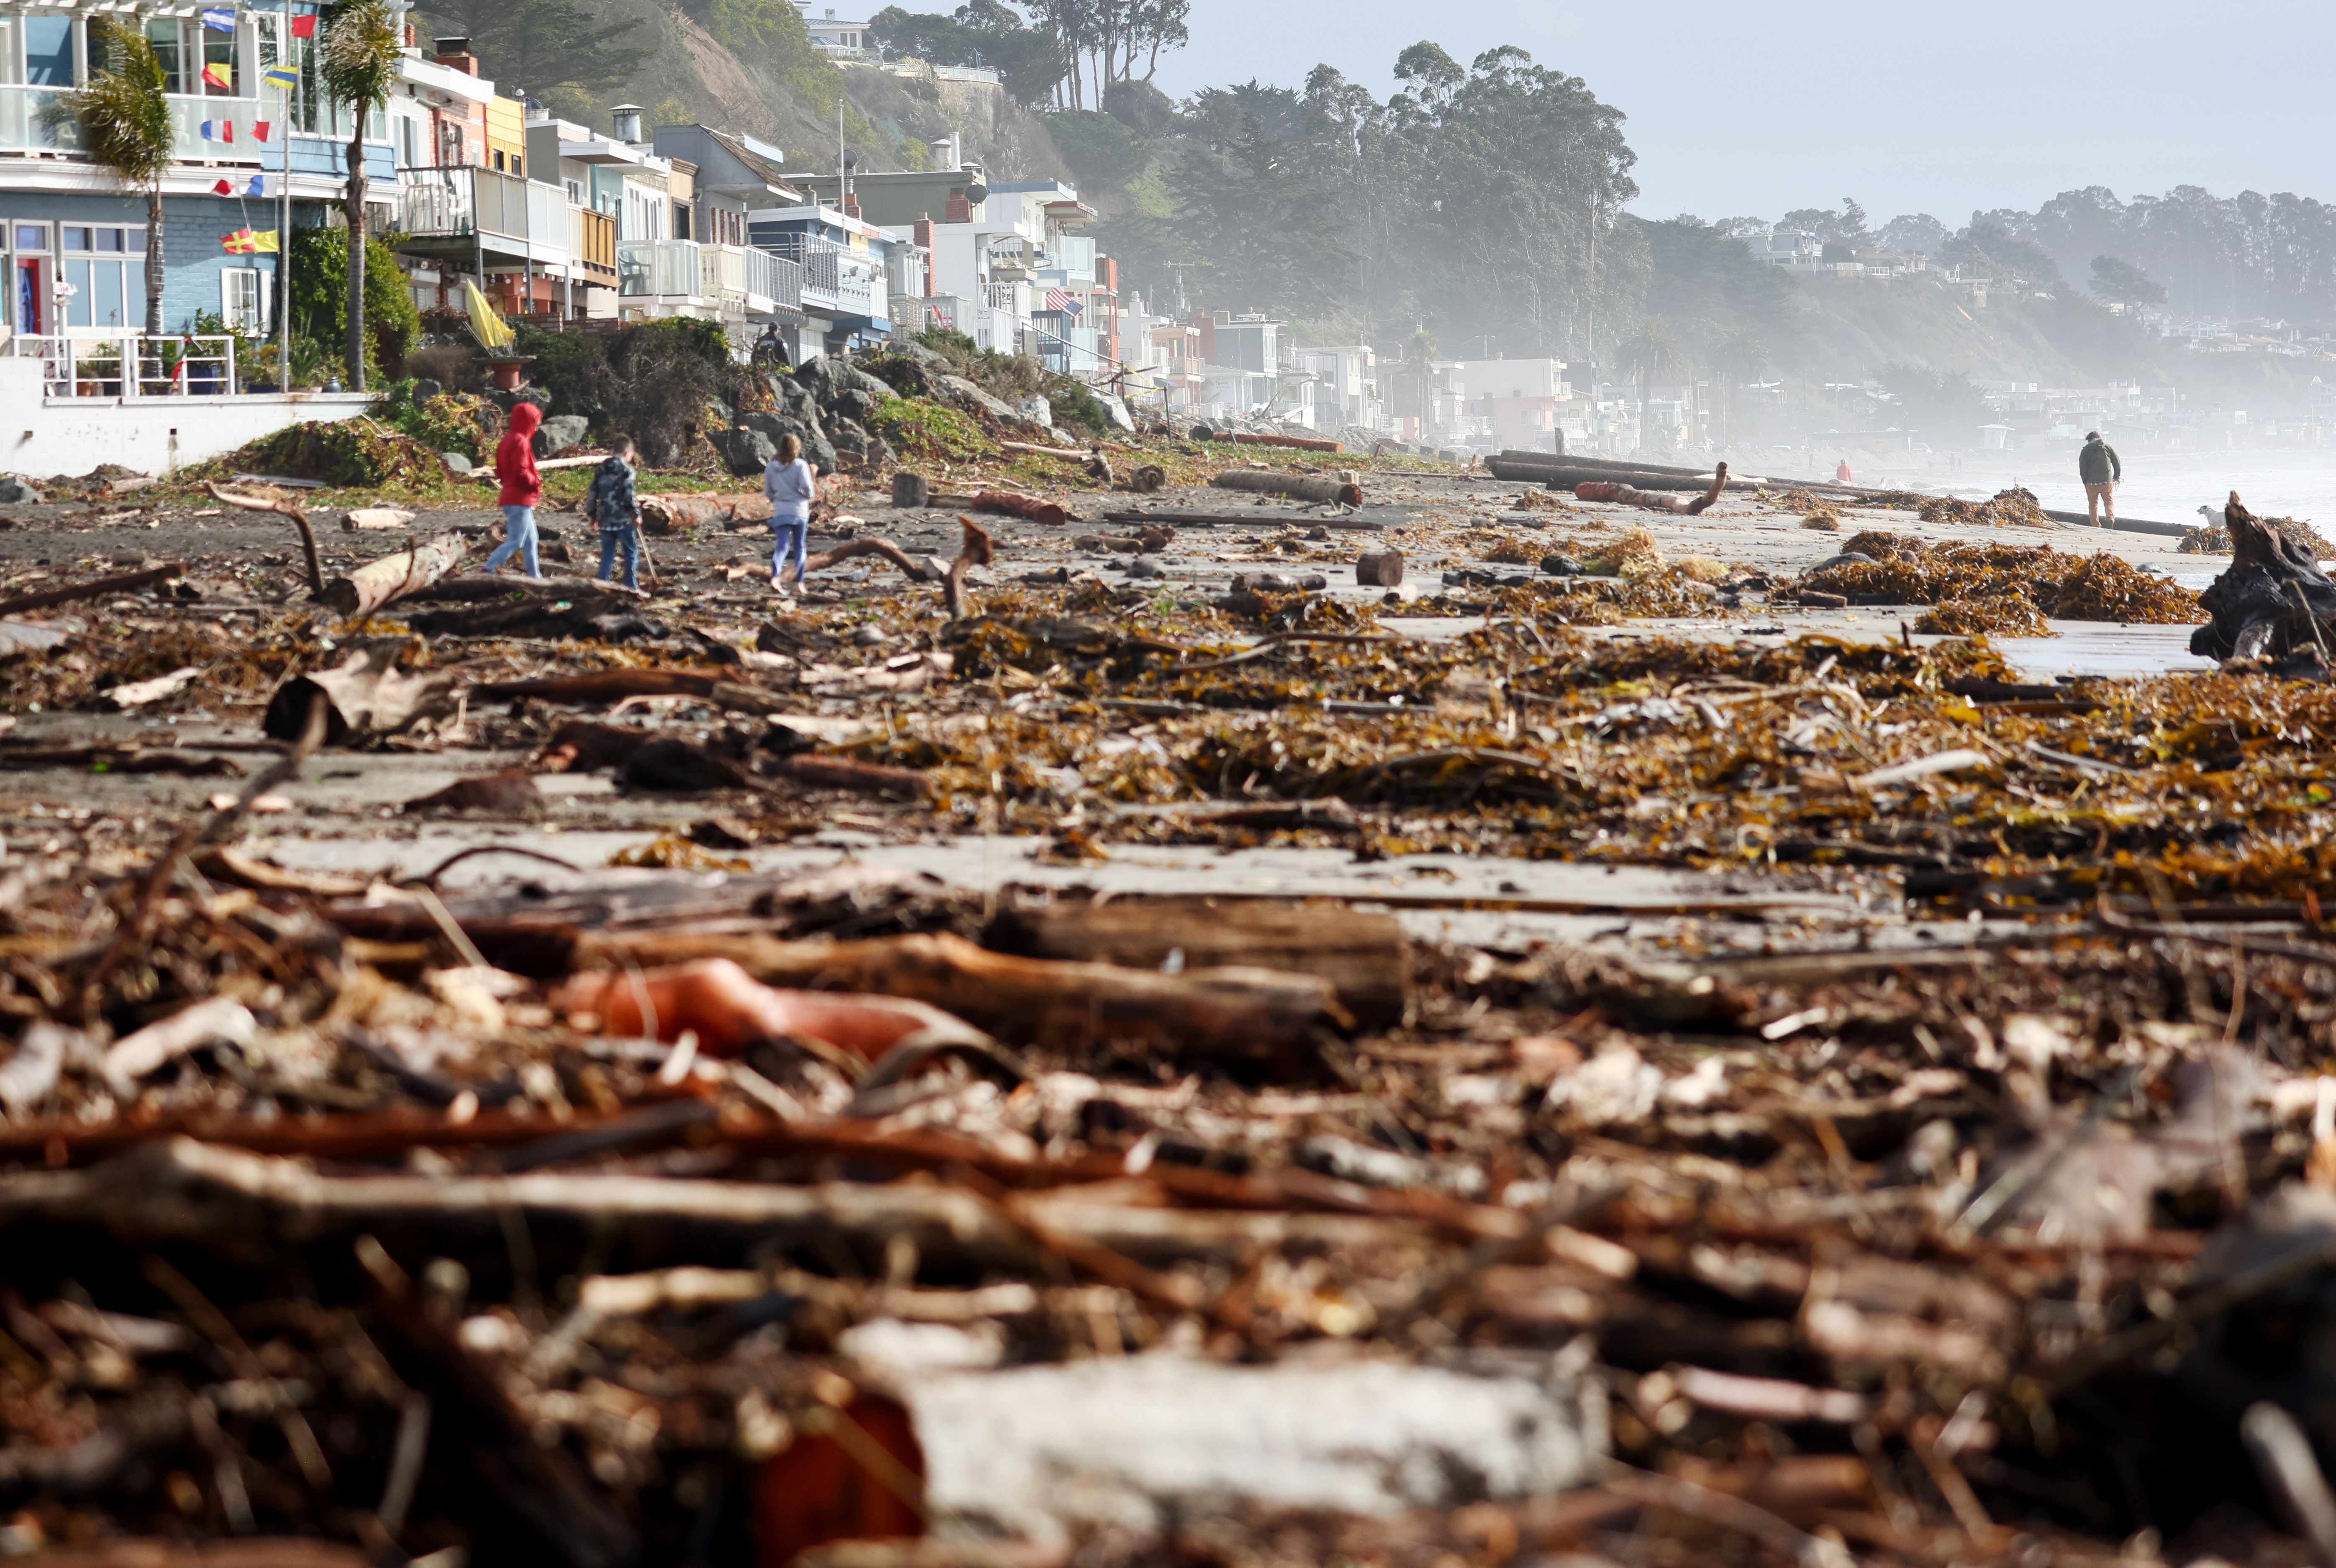 People walk amid storm debris washed up on the beach on January 10, 2022 in Aptos, California. 